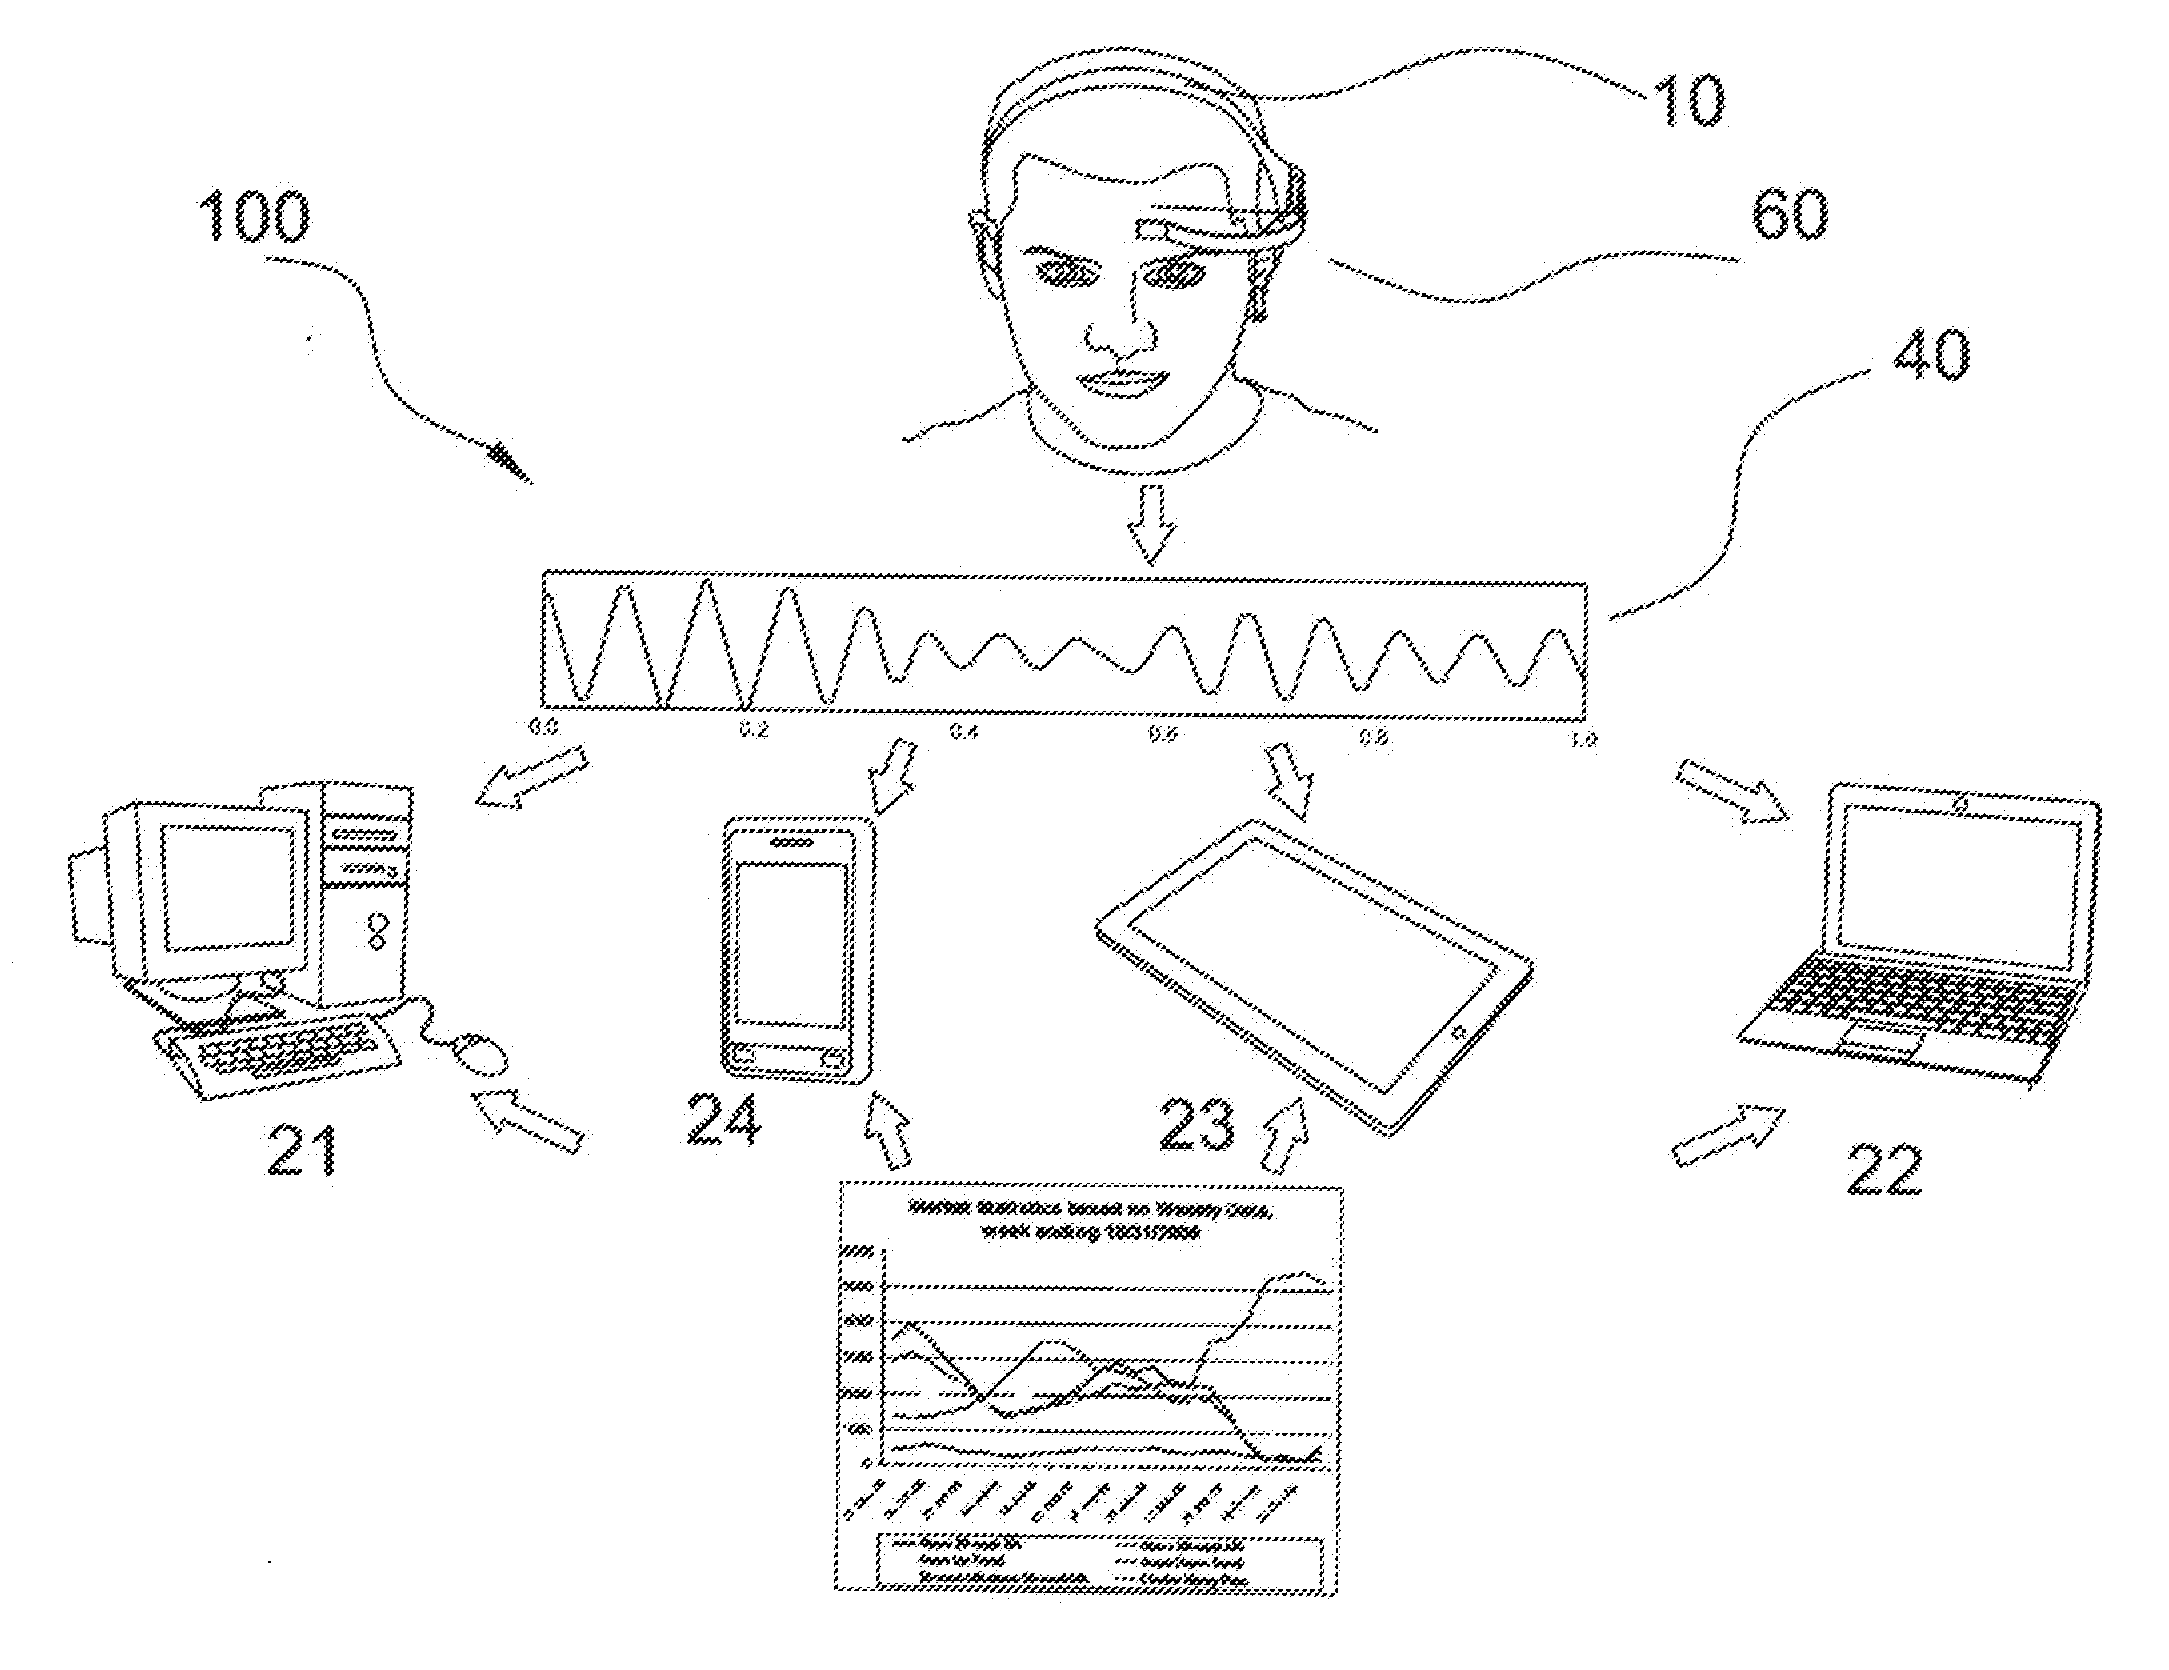 Method and system to provide investment traders biofeedback in Real-Time during the decision time immediately prior to make or not make a transaction